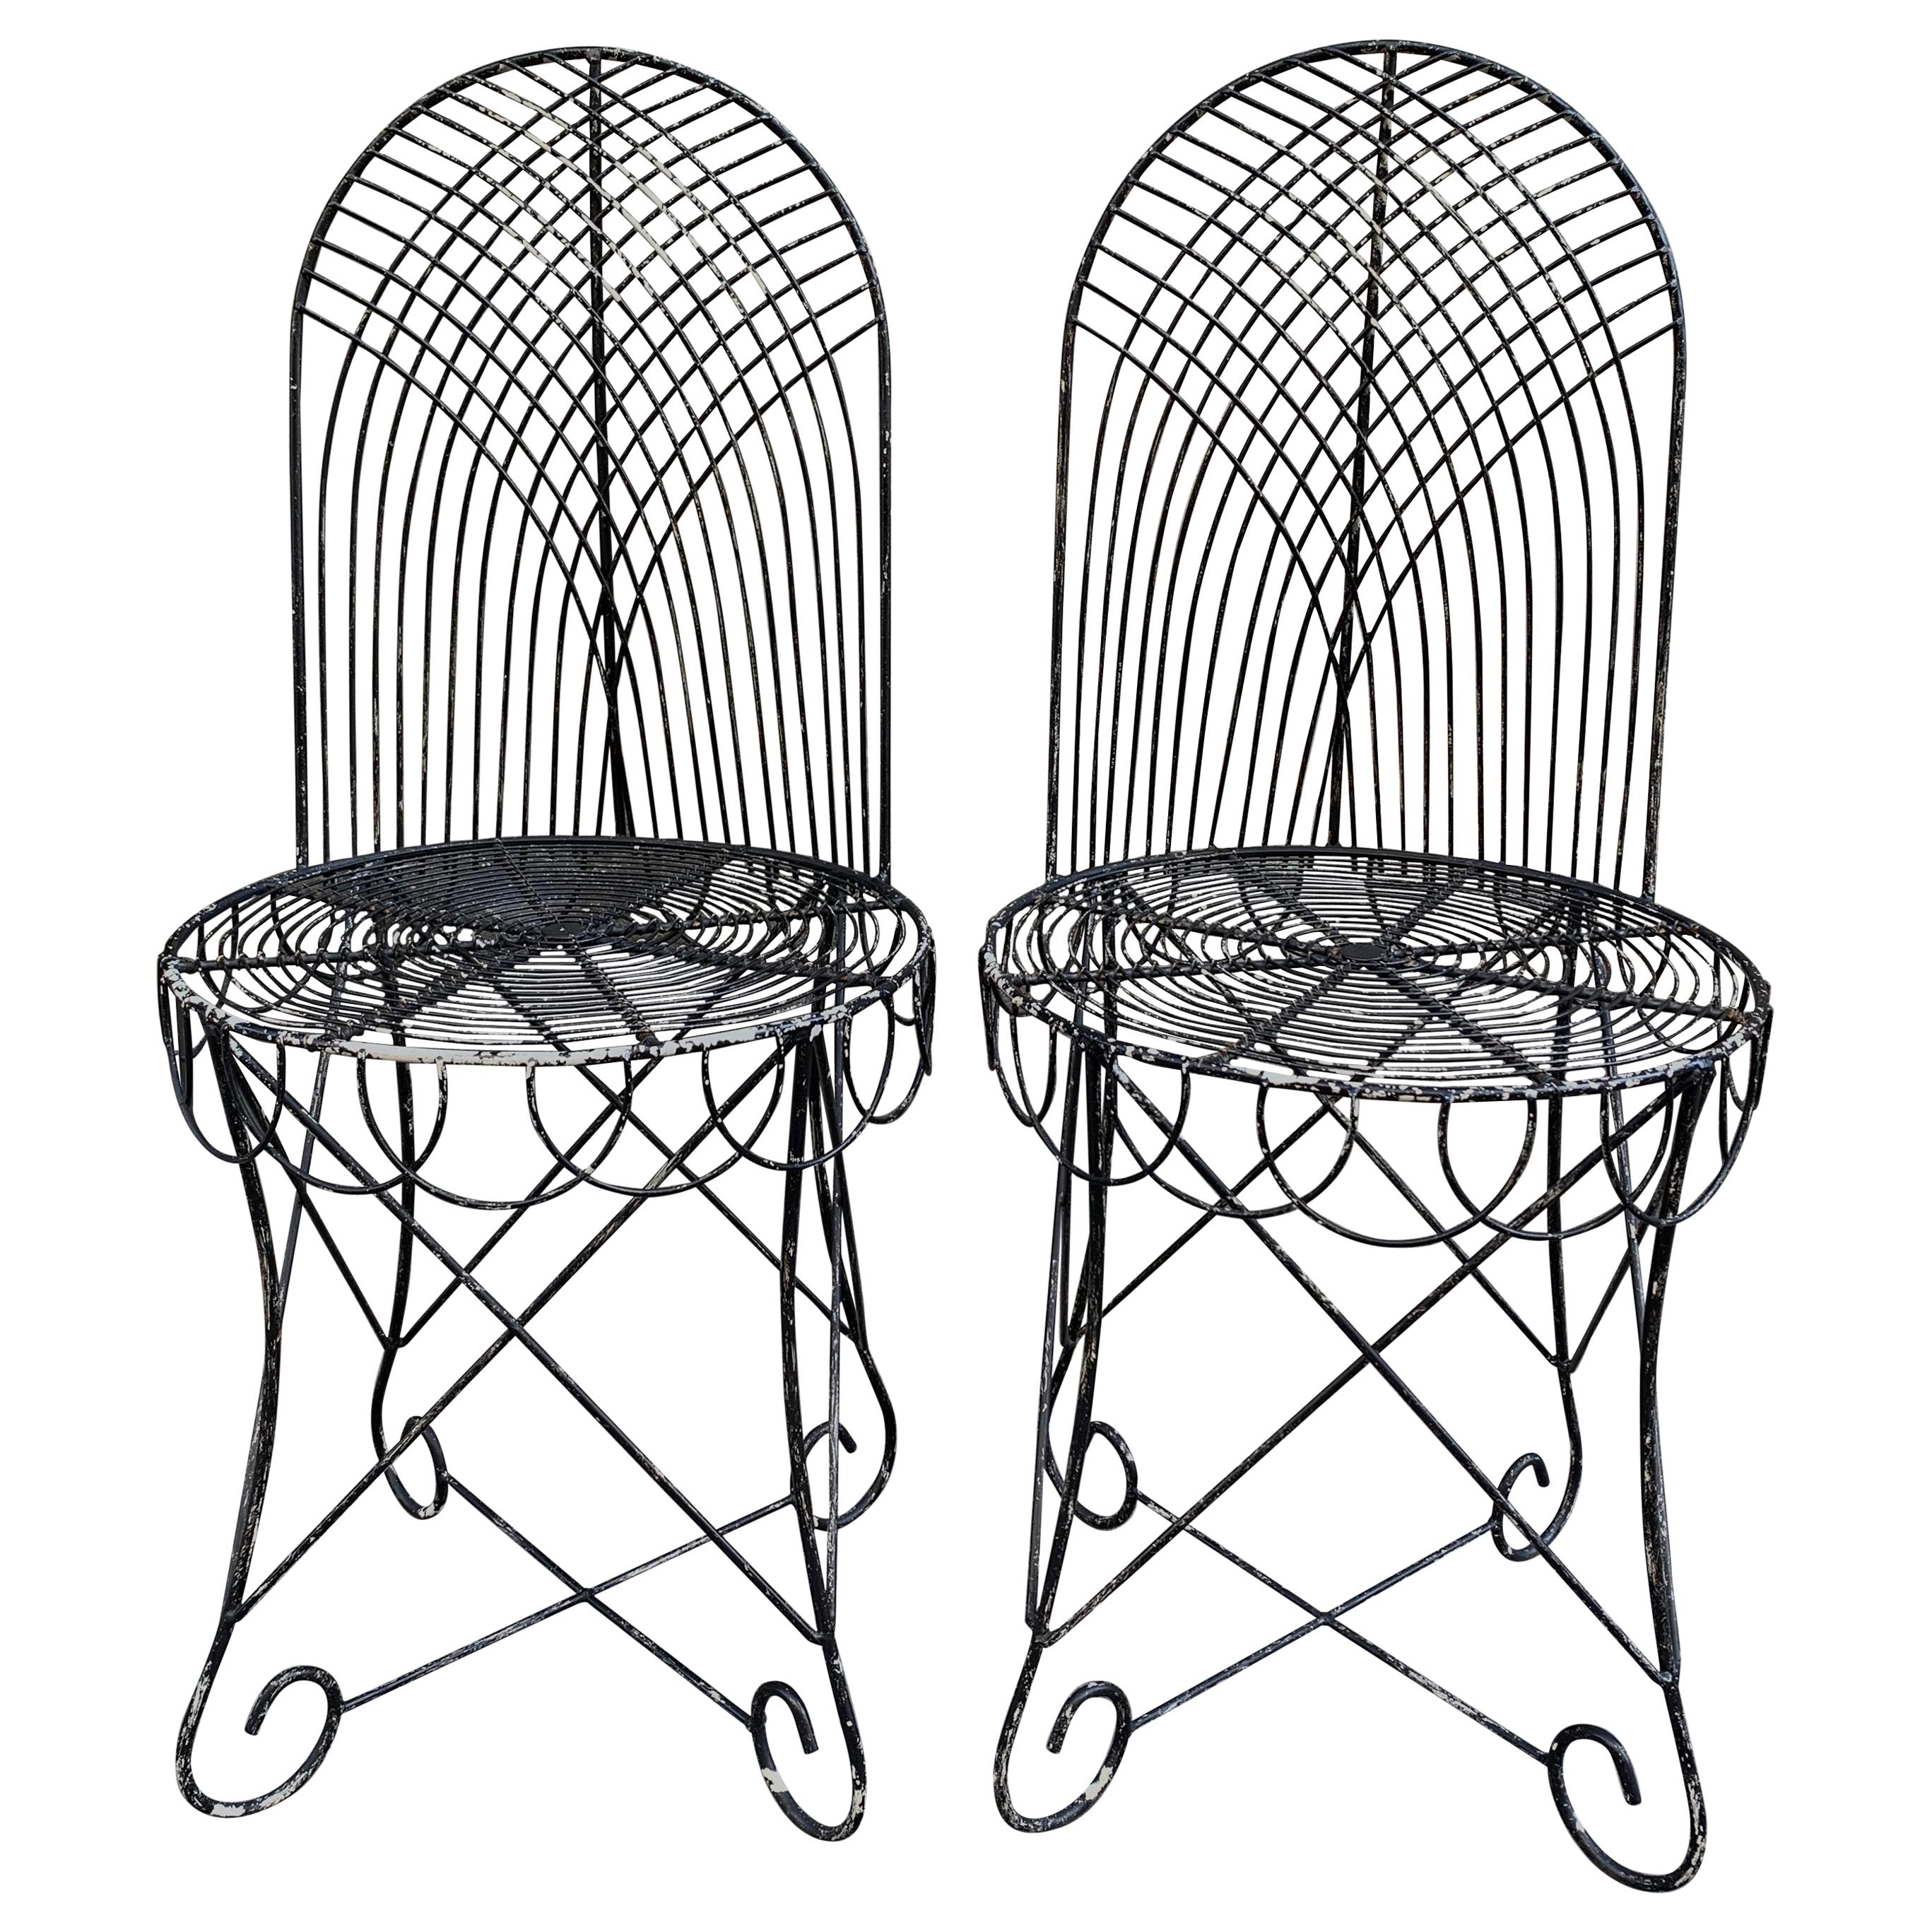 Vintage Black Wrought Iron Midcentury Garden Pair of Chairs, 1950s